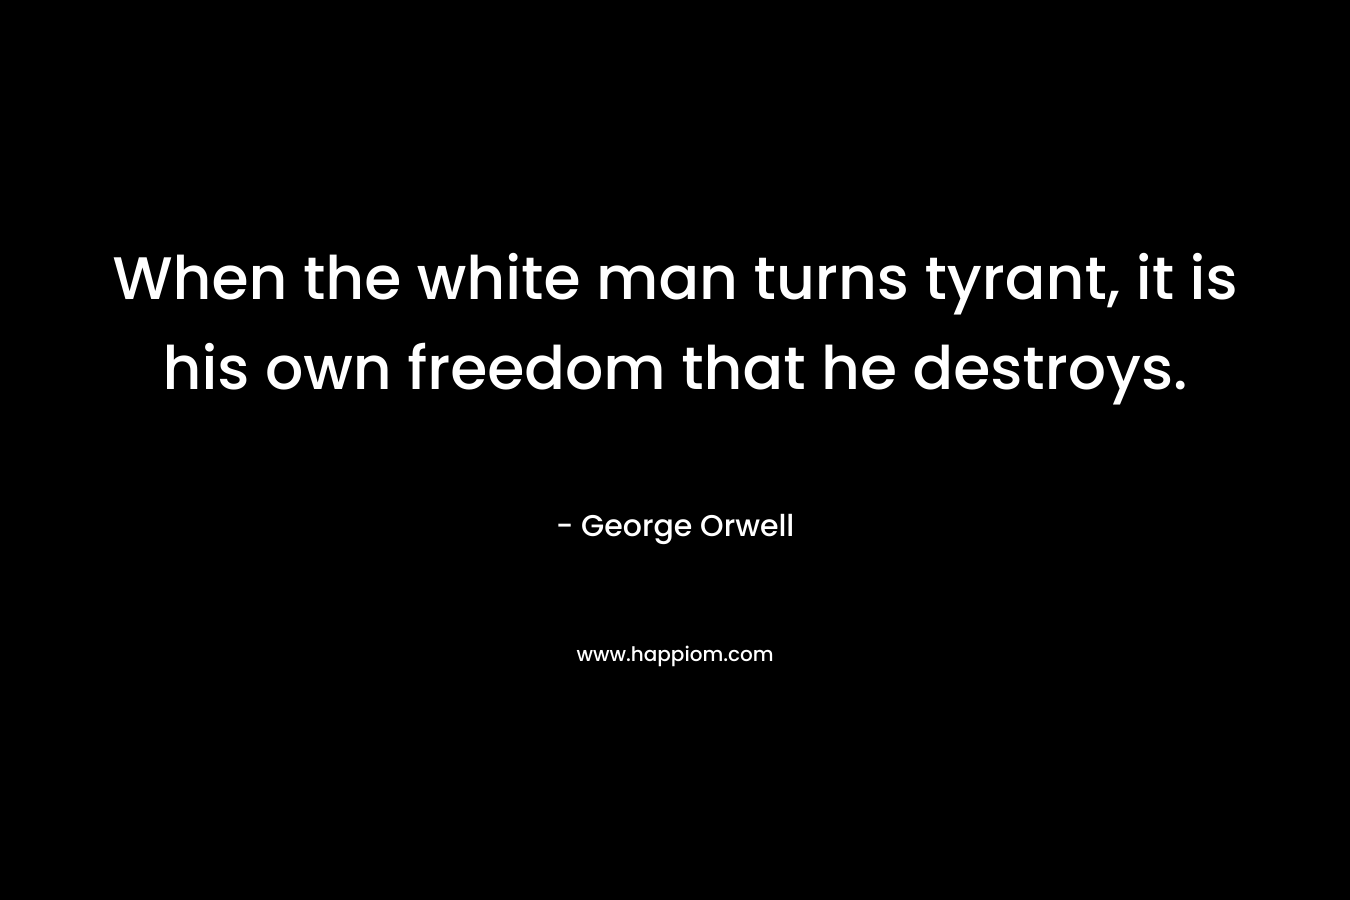 When the white man turns tyrant, it is his own freedom that he destroys. – George Orwell